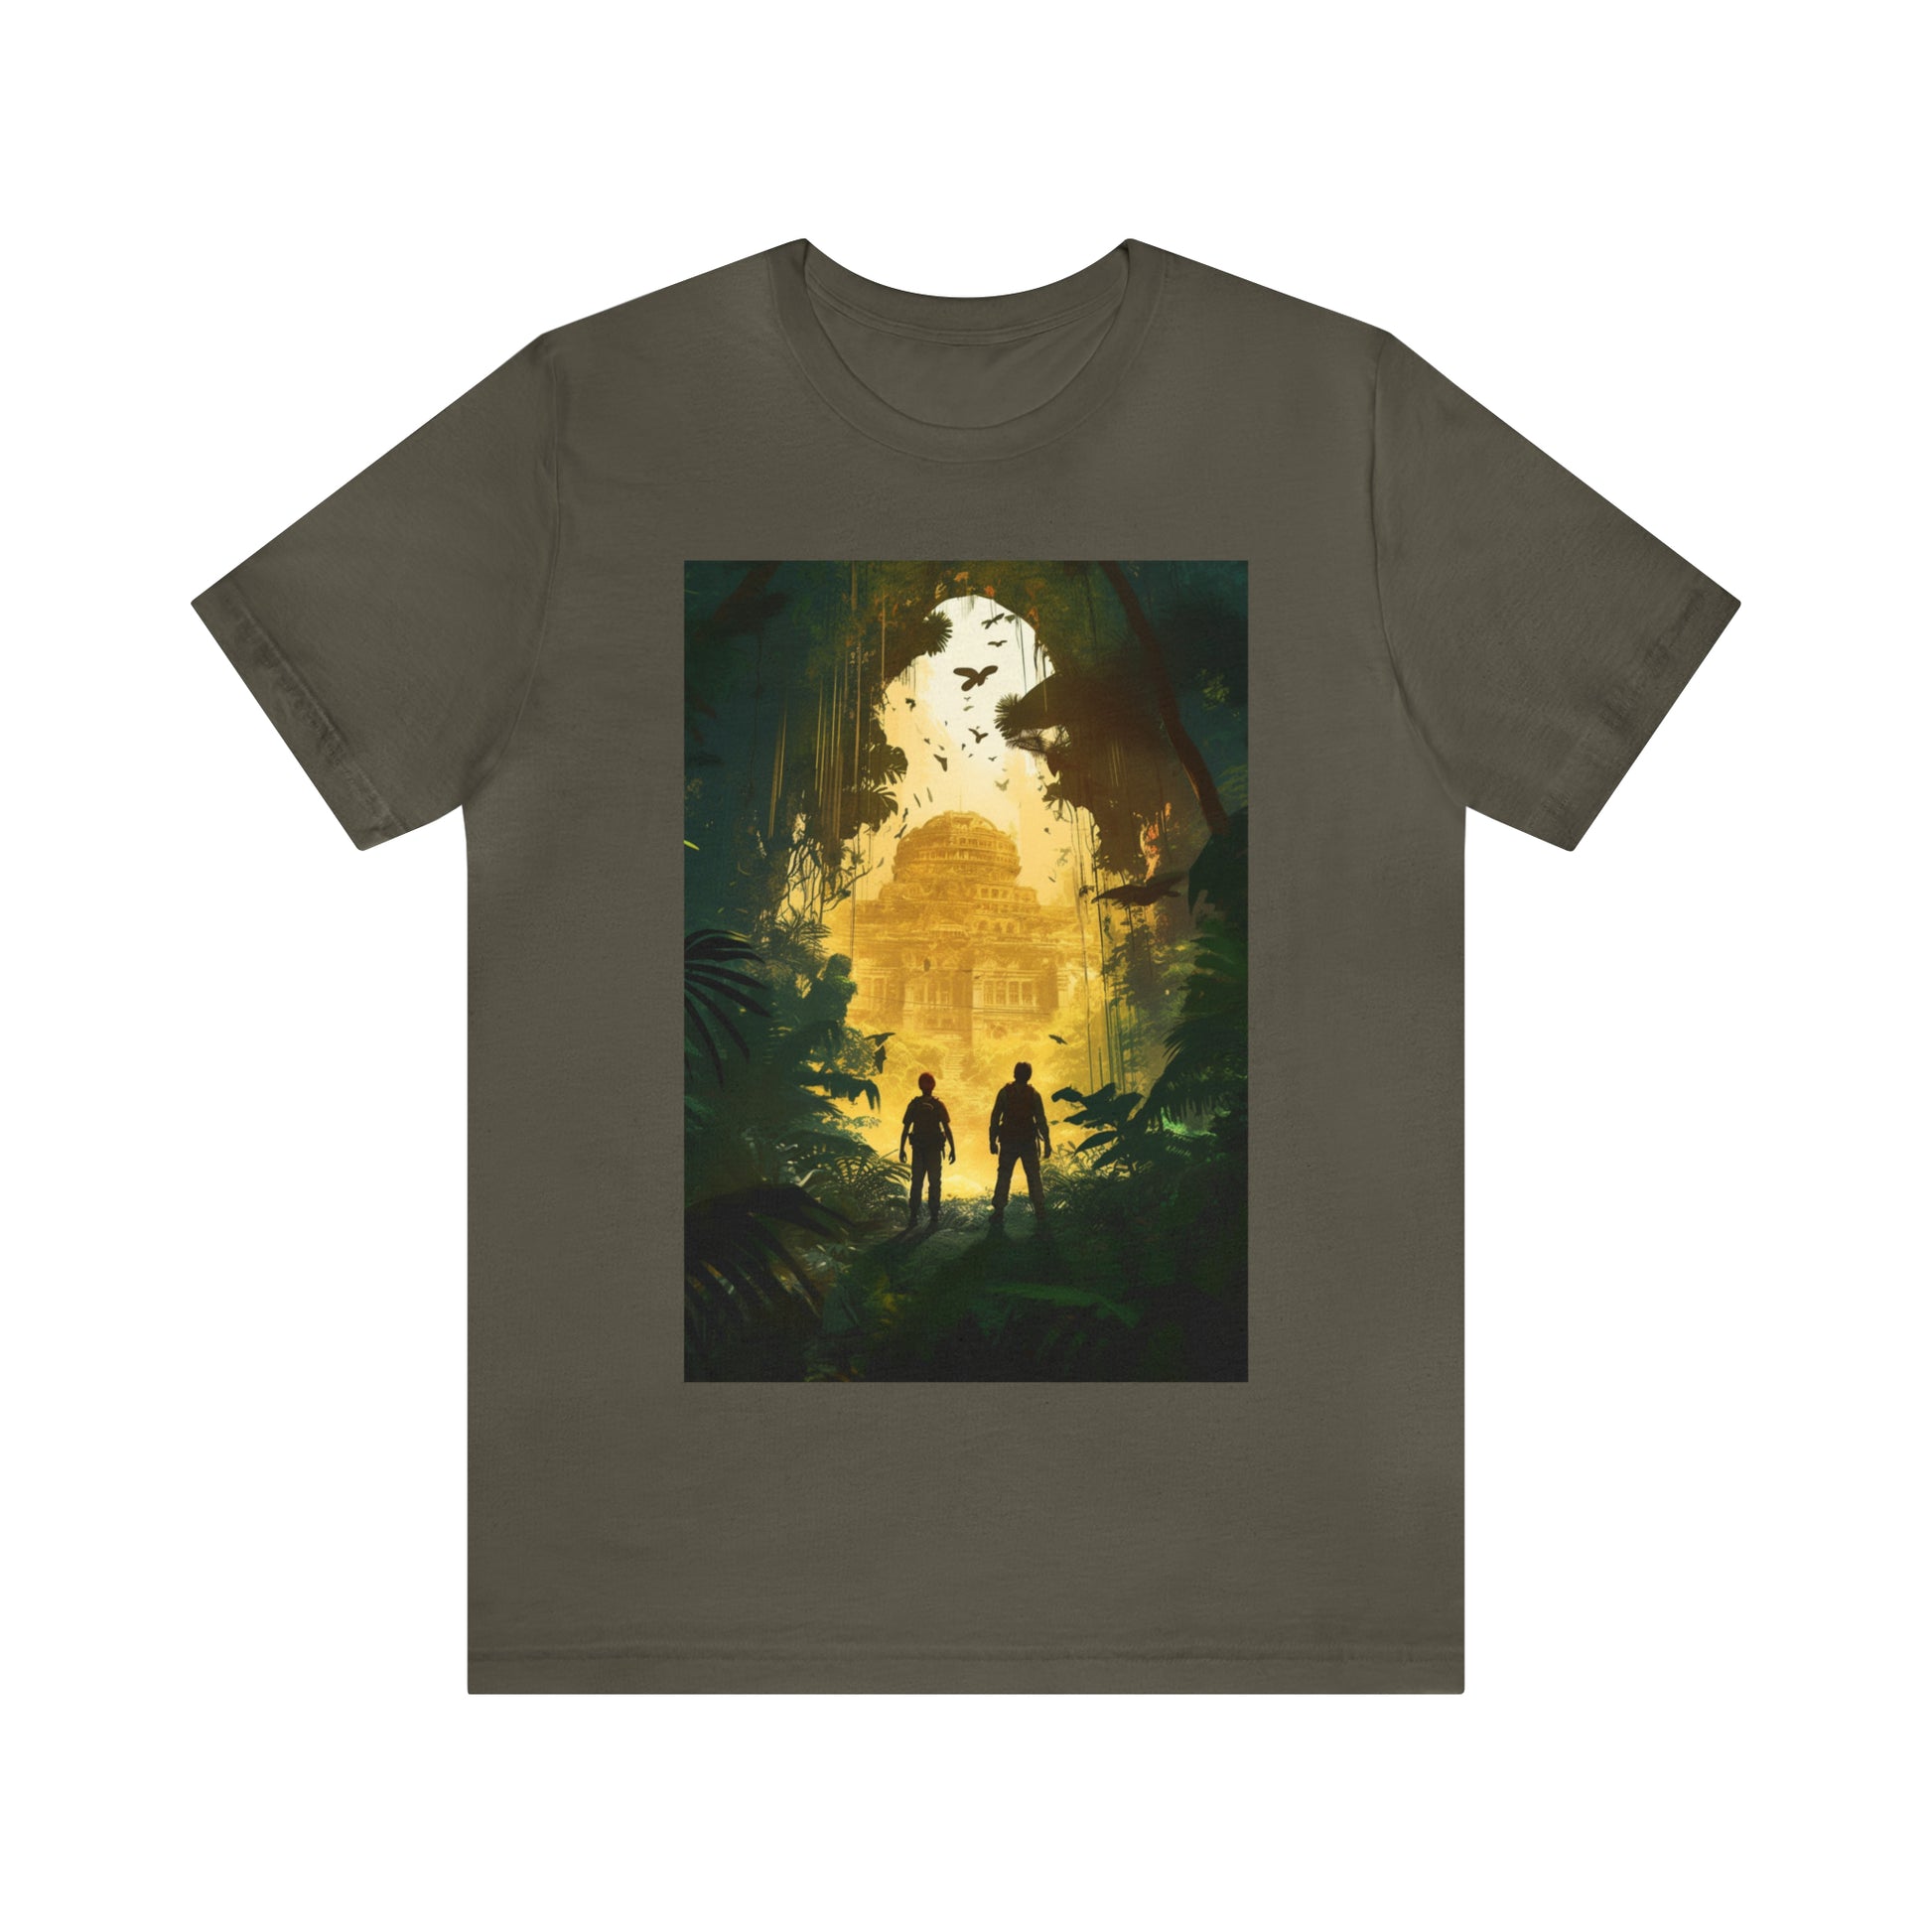 army-quest-thread-tee-shirt-with-ruins-of-arnak-scene-on-front